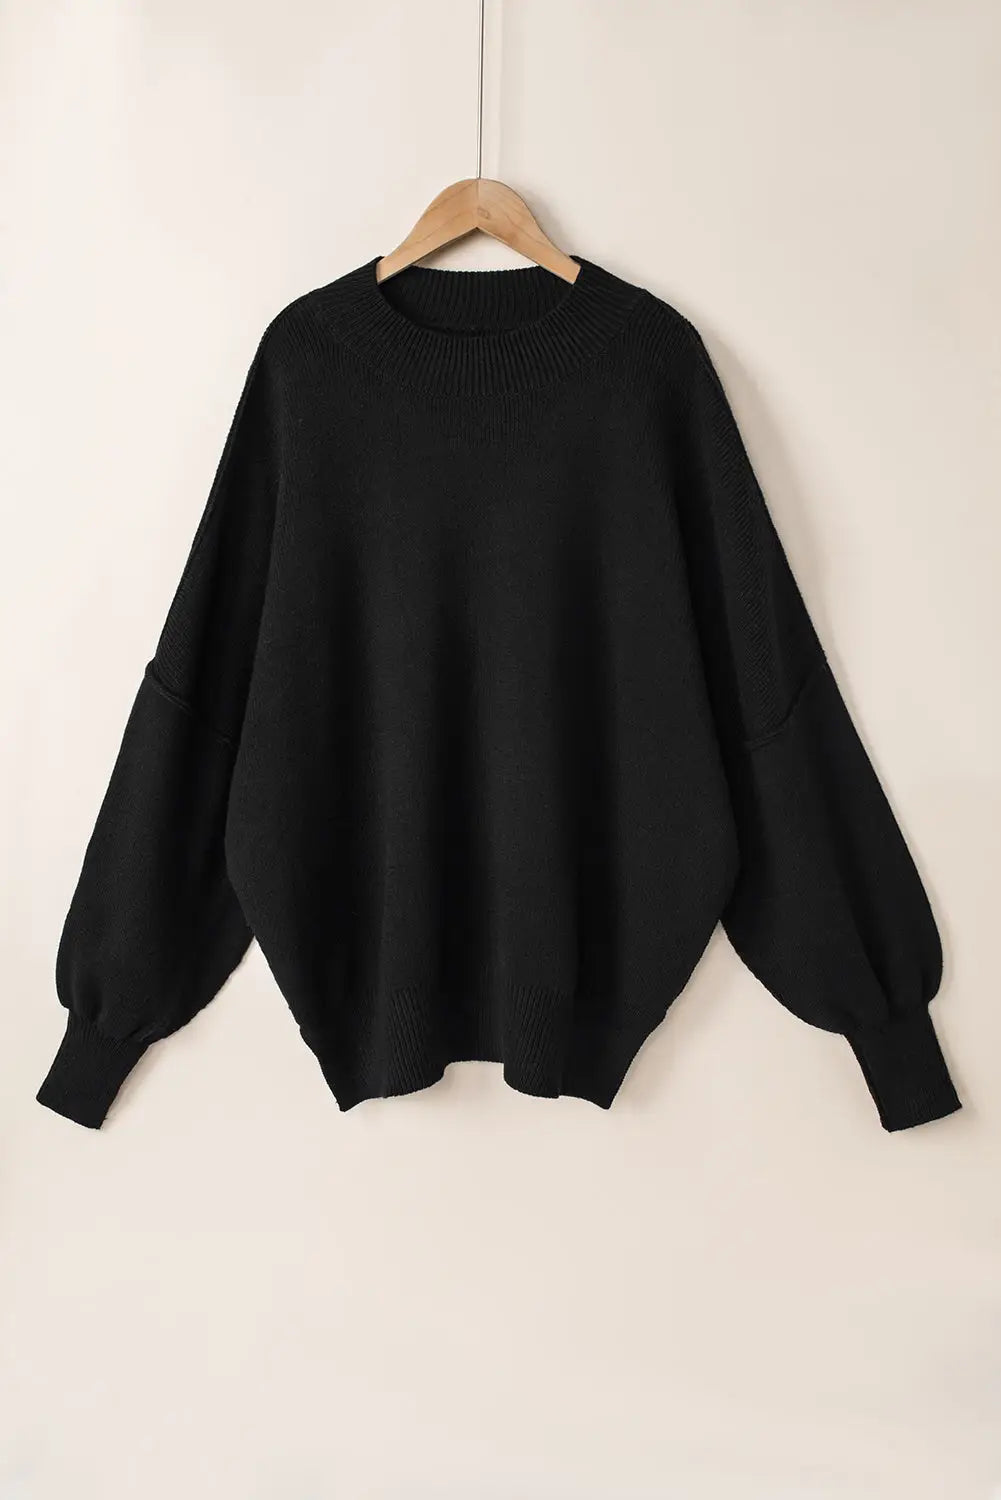 Black oversized drop shoulder bubble sleeve pullover sweater - s / 50% viscose + 28% polyester + 22% polyamide - tops